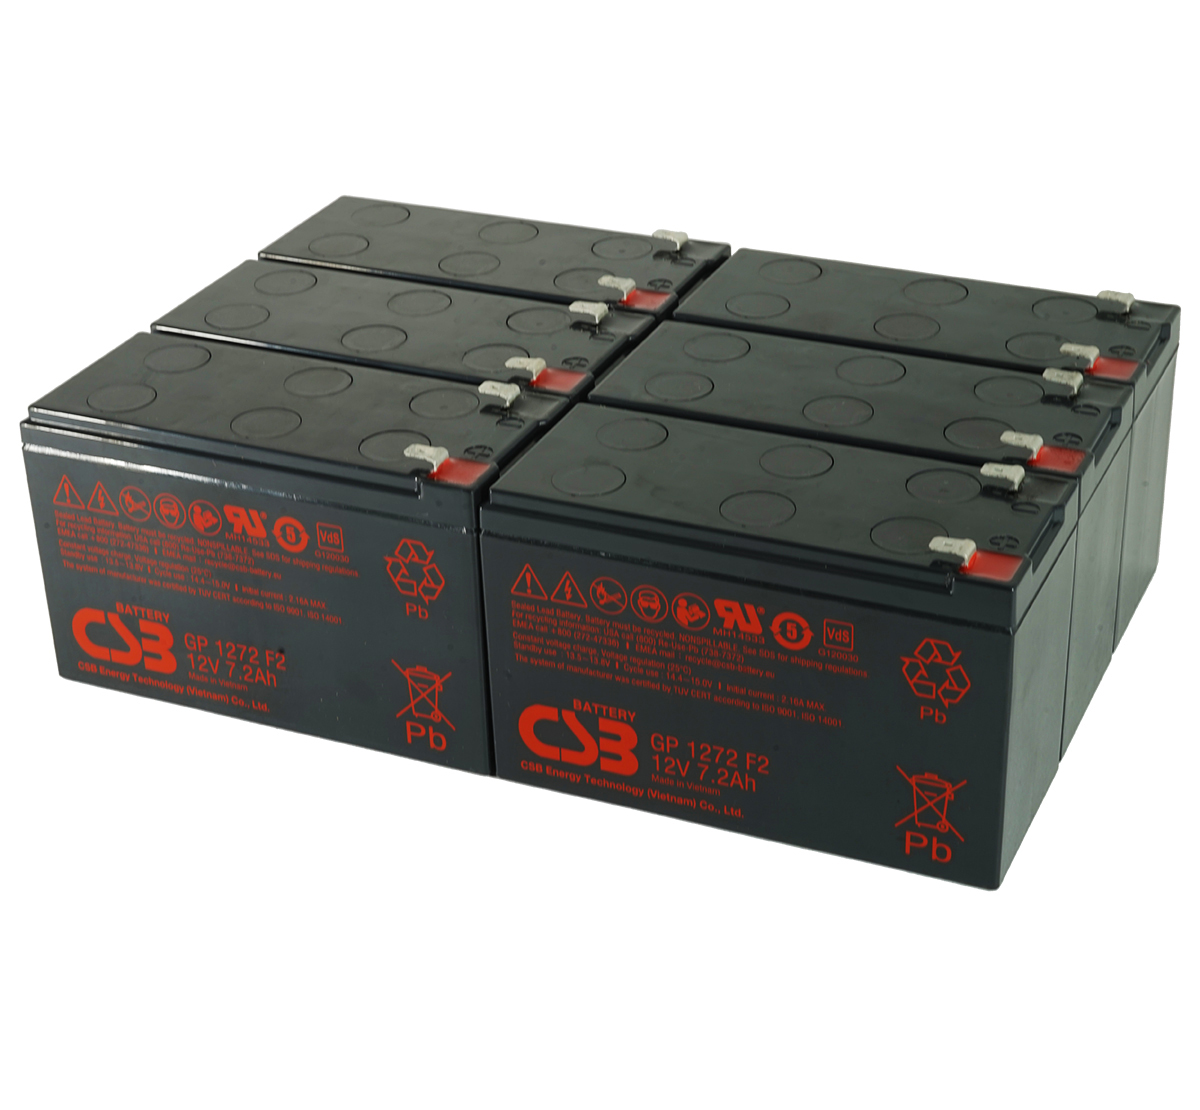 MDS1011 UPS Battery Kit for MGE AB1011